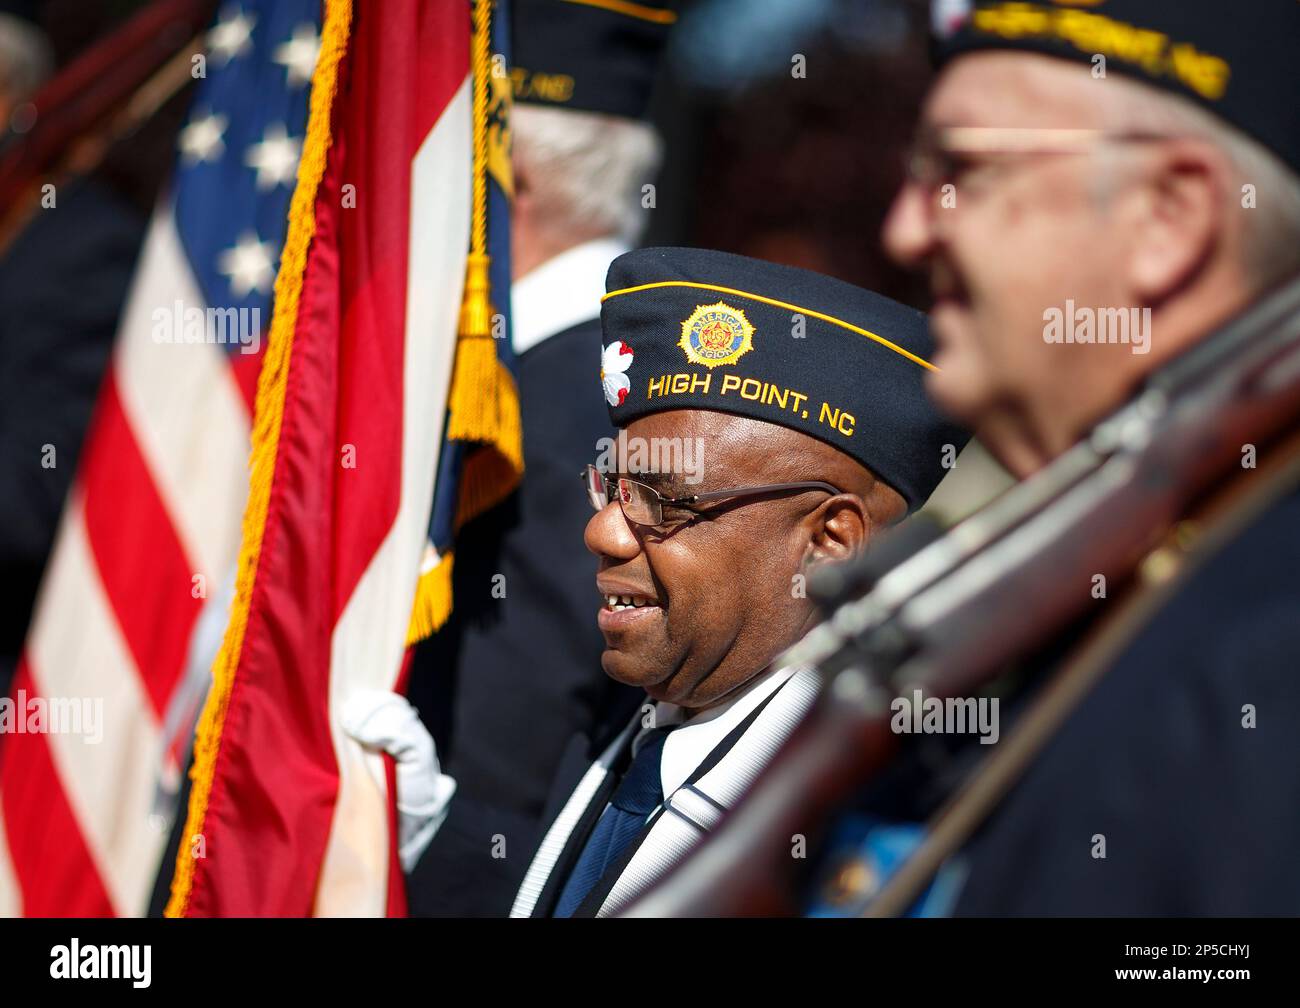 Paul Bogan smiles while holding the North Carolina State Flag as part of  the honor guard from the High Point American Legion Post 87. The High Point  Veterans 10th Anniversary Memorial Service